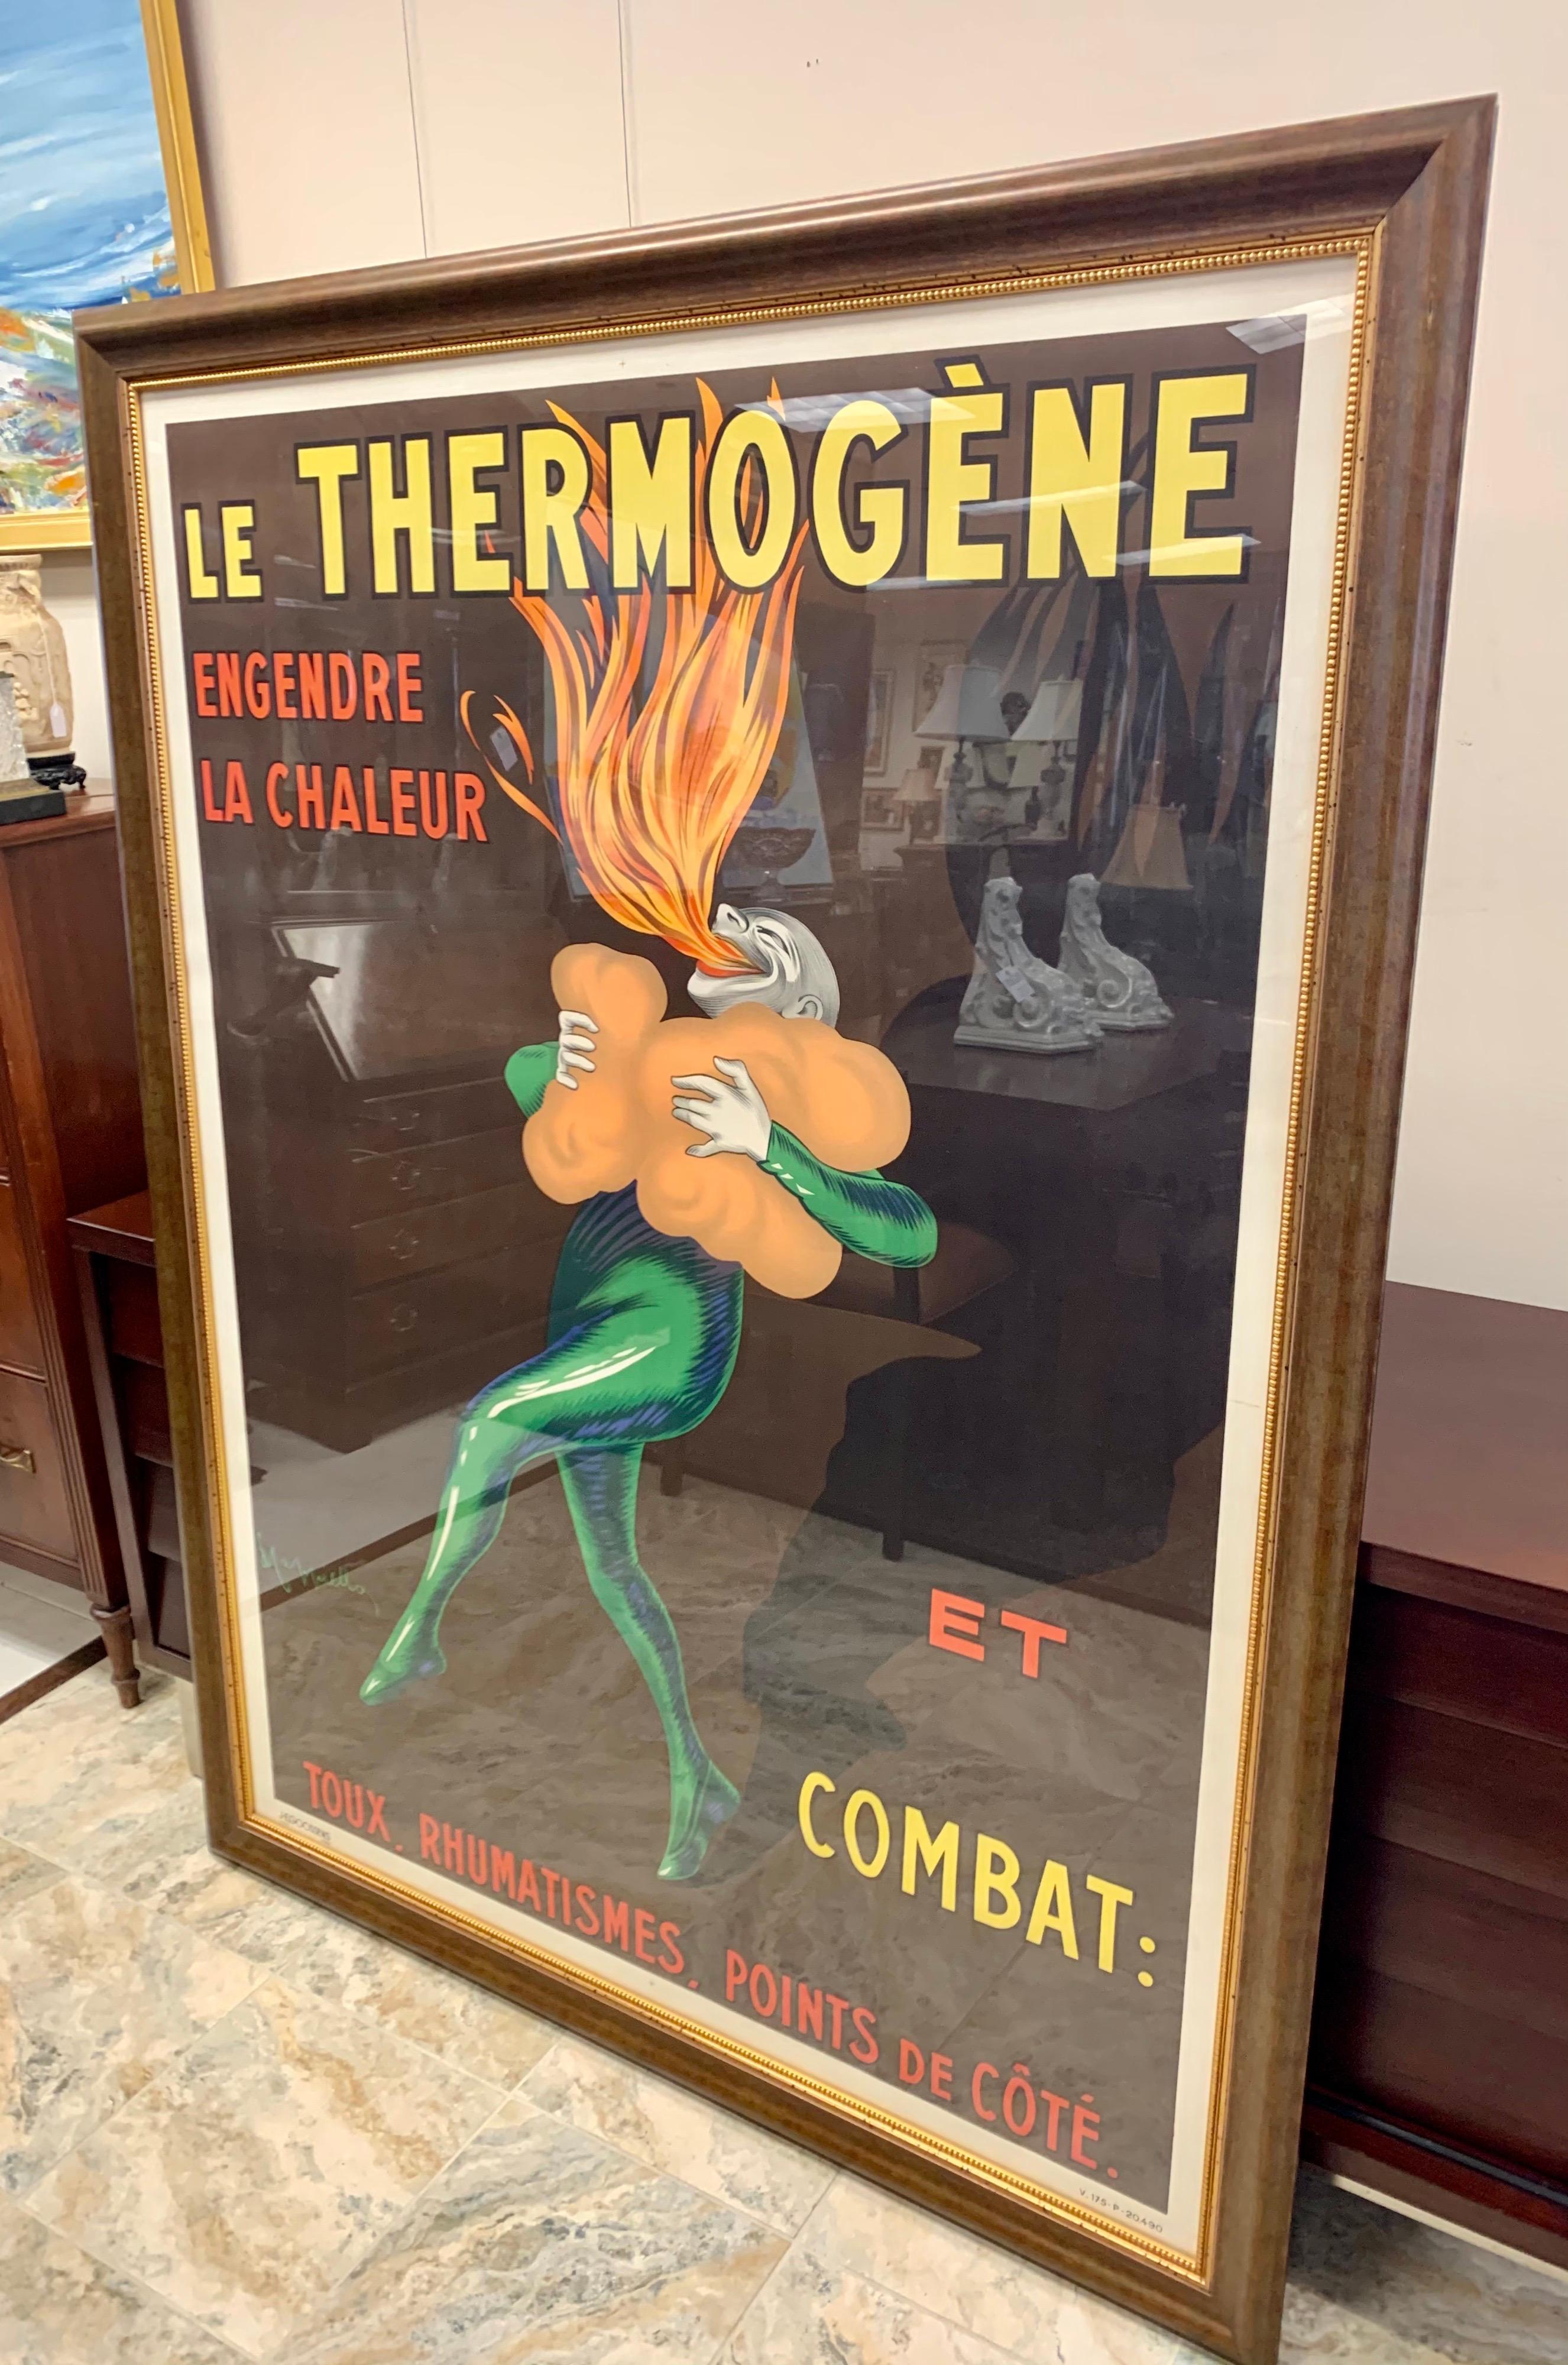 Rare, vintage Le Thermogene framed poster. Very large and in excellent condition framed and under plexi.
Now, more than ever, home is where the heart is.